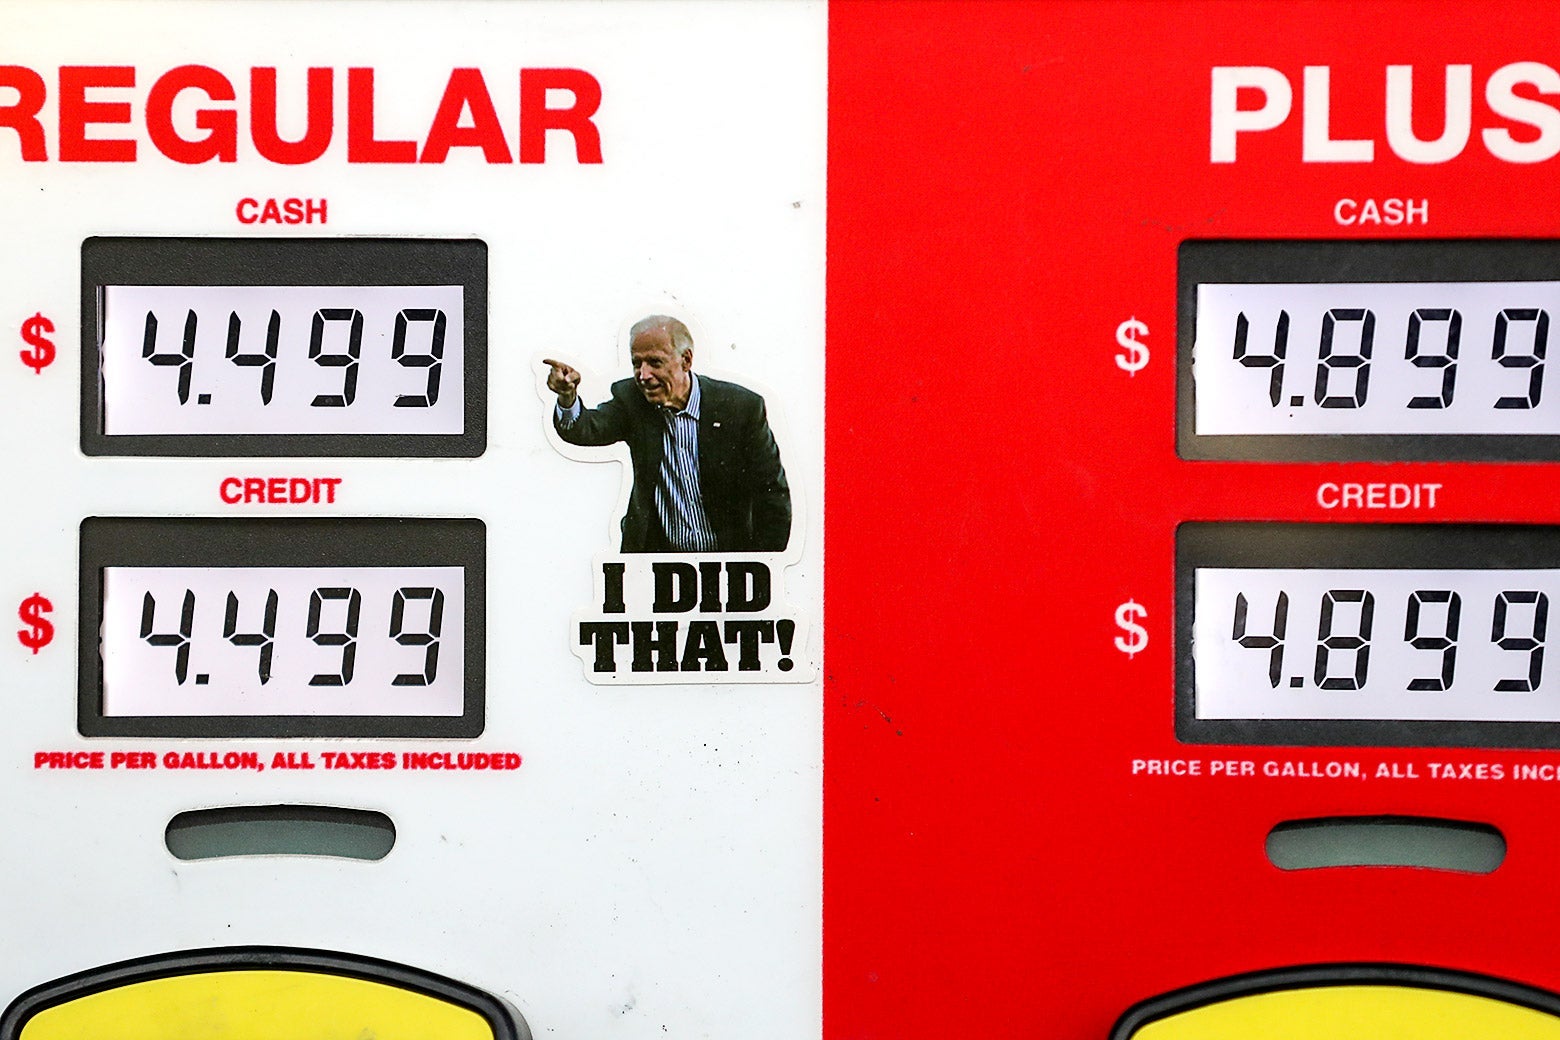 Joe Biden Gas Prices The Story Behind The “i Did That” Stickers